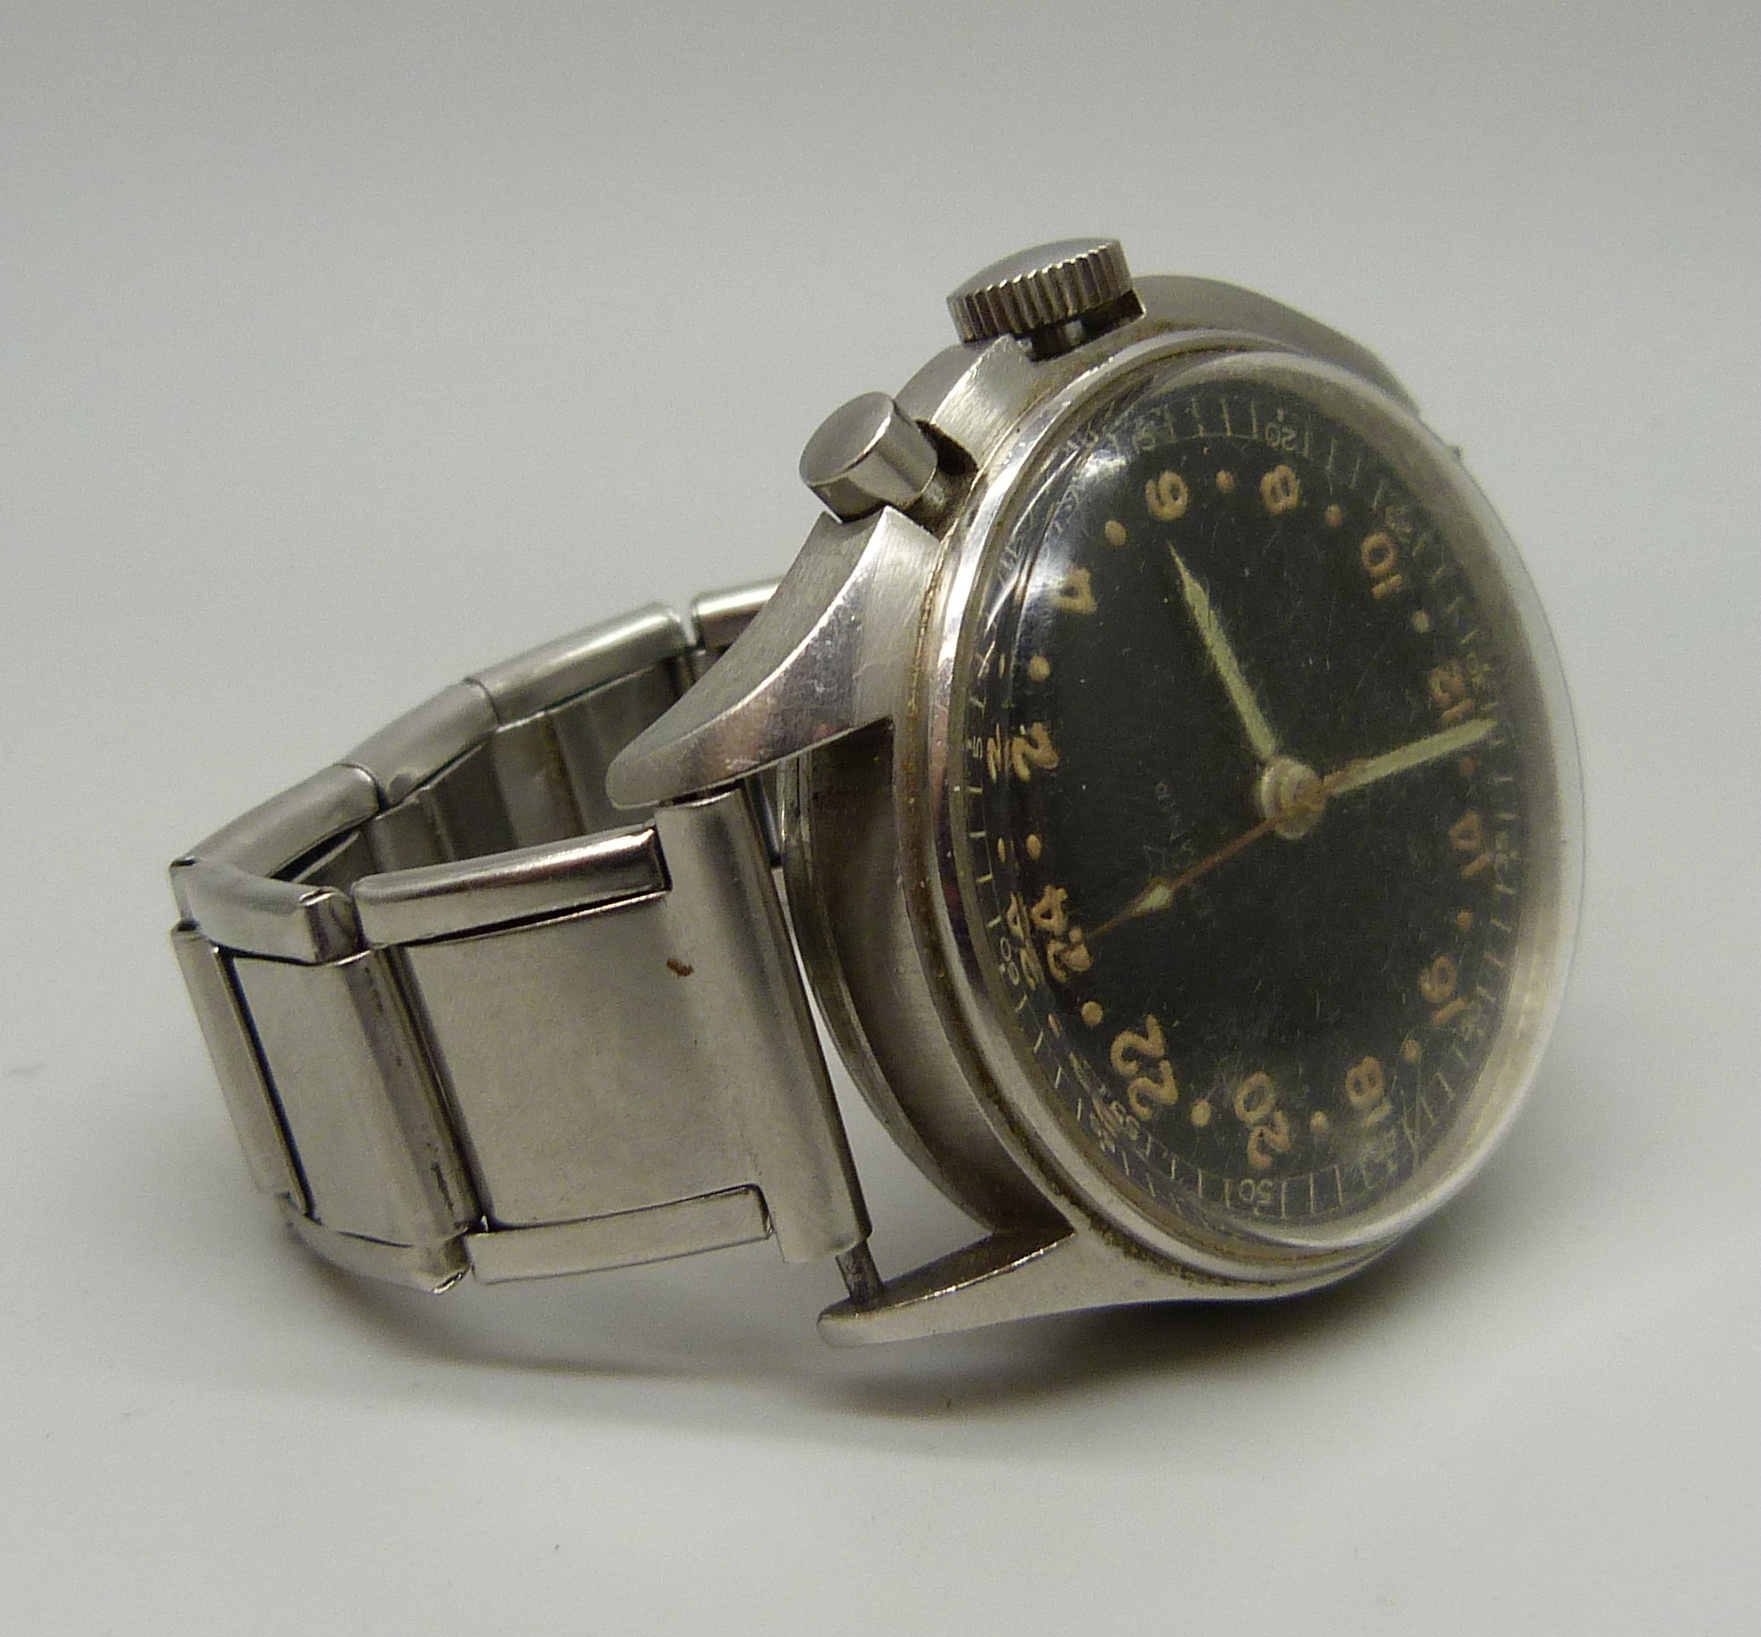 A German Lemania single button chronometer with 24-hour clock and sweep second hand, 39mm case - Image 2 of 5